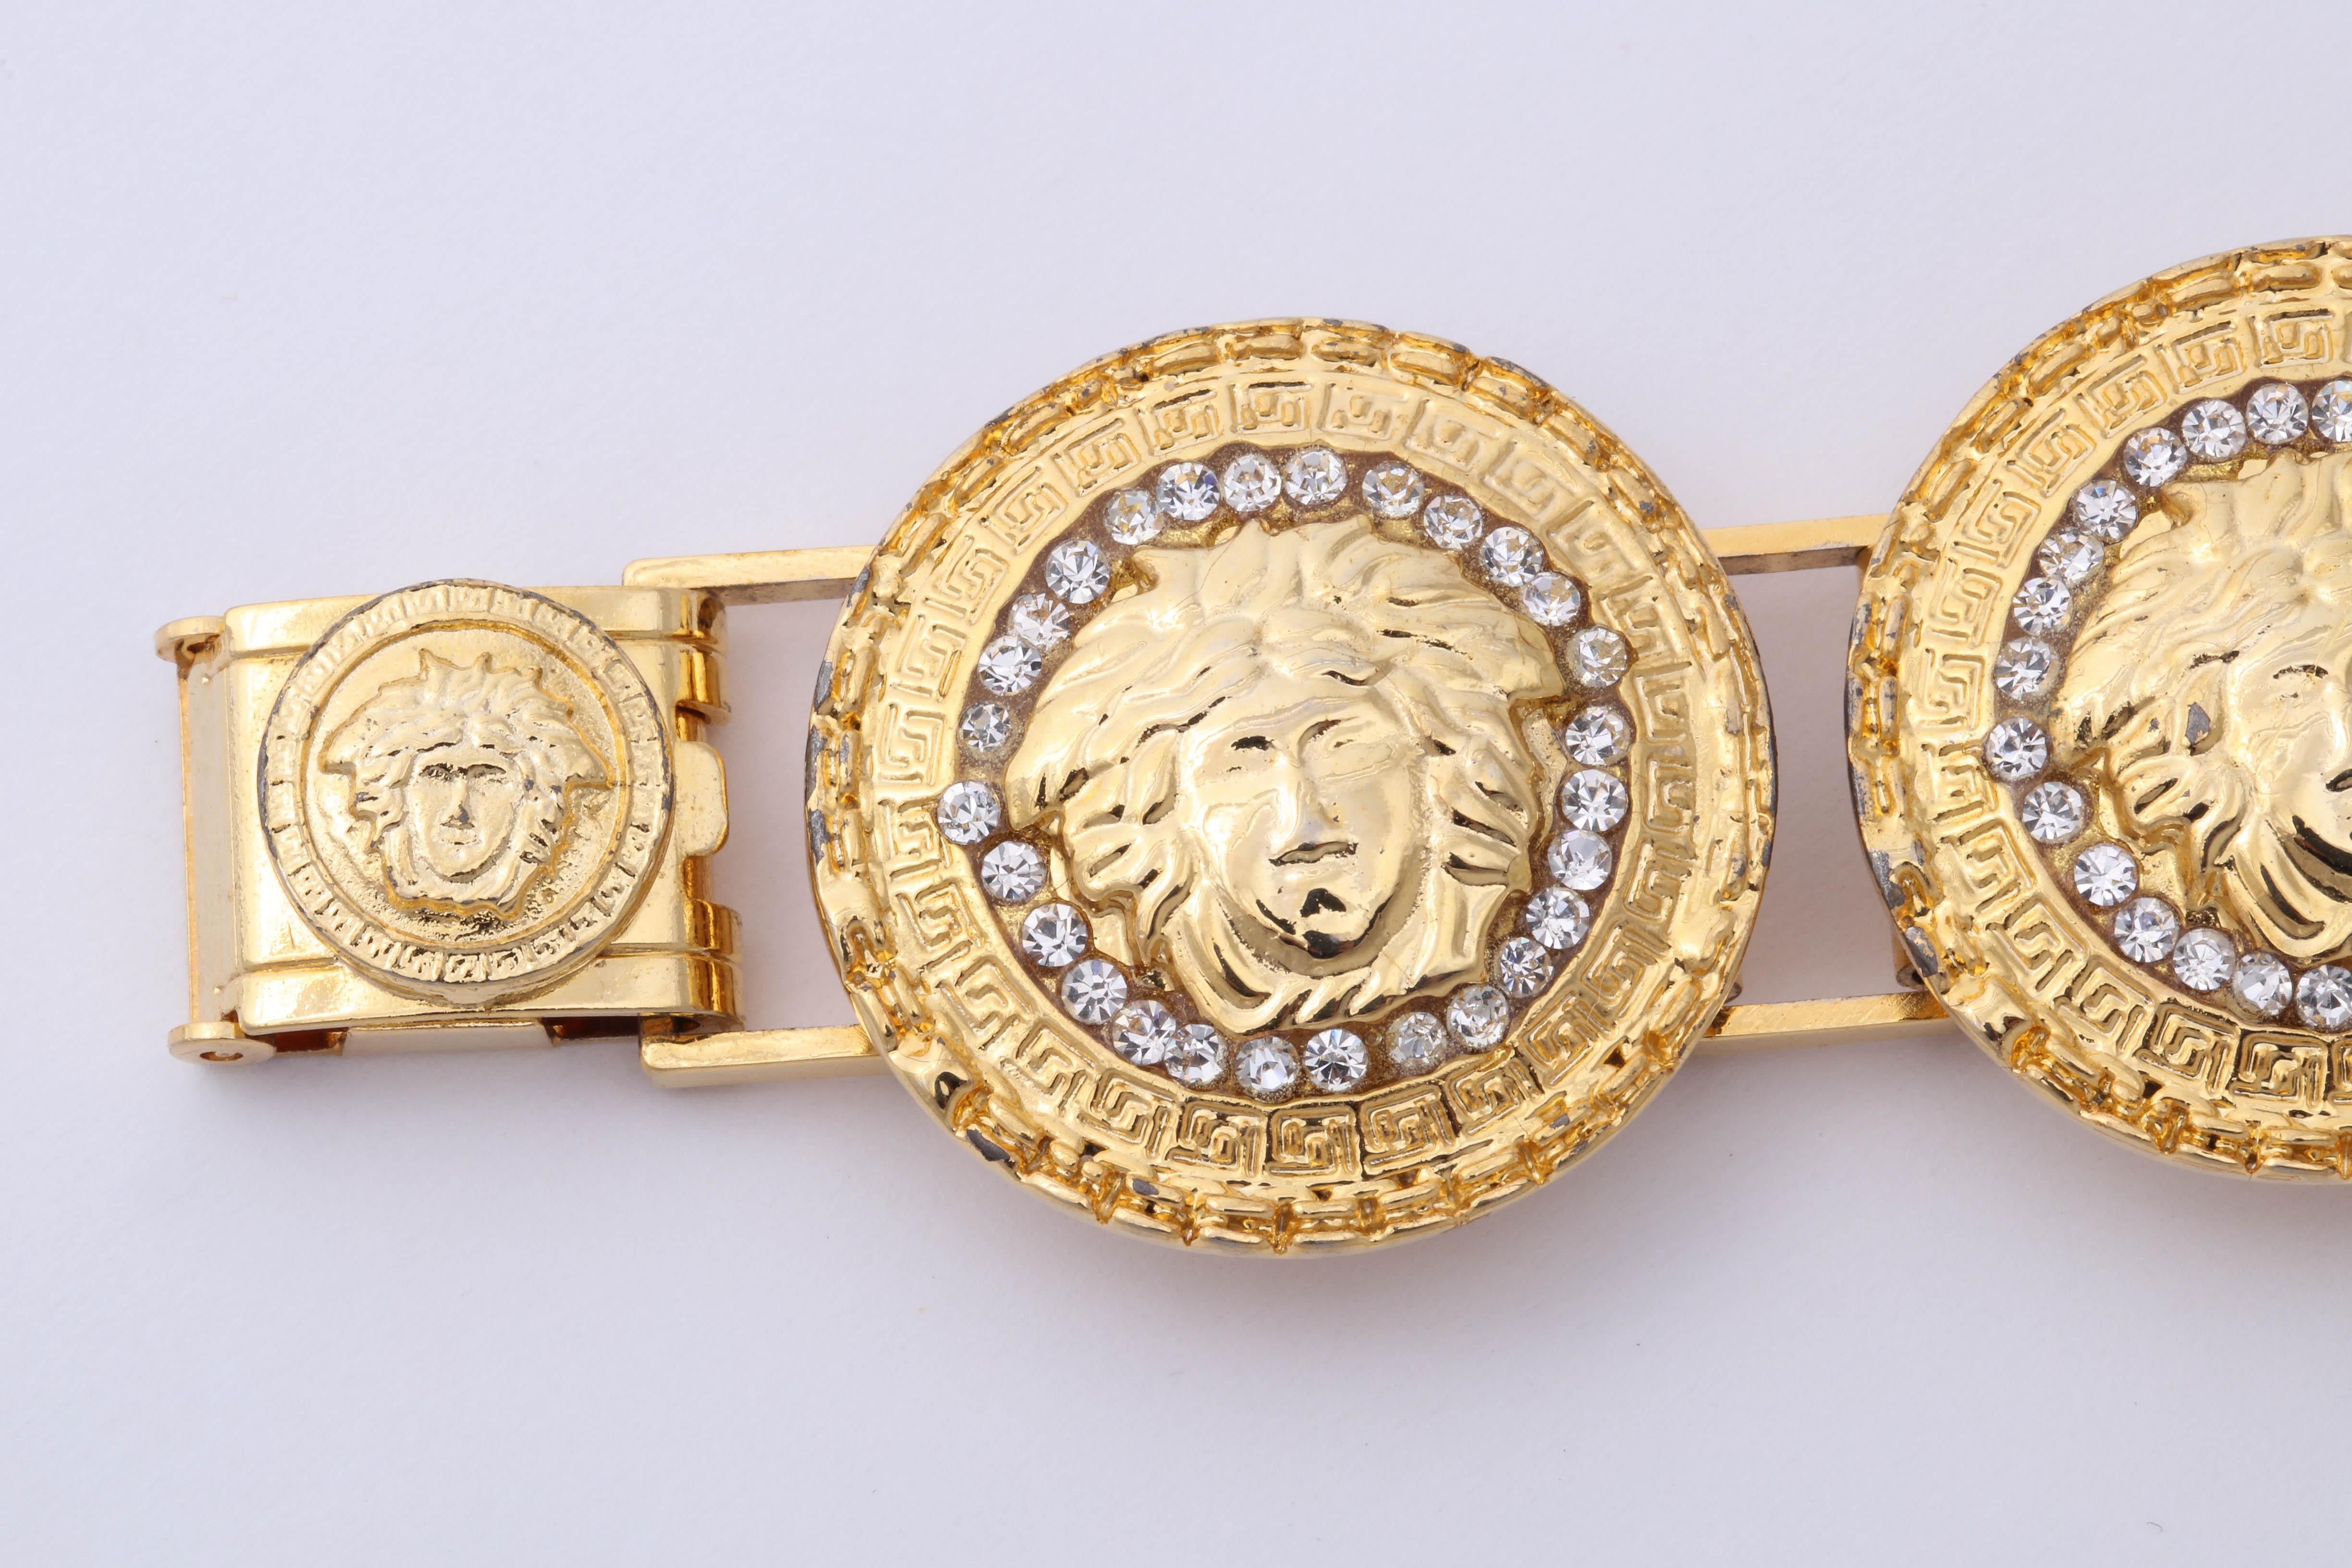 Gianni Versace Gold Toned Bracelet With 6 Medusas and Rhinestones In Good Condition For Sale In Chicago, IL